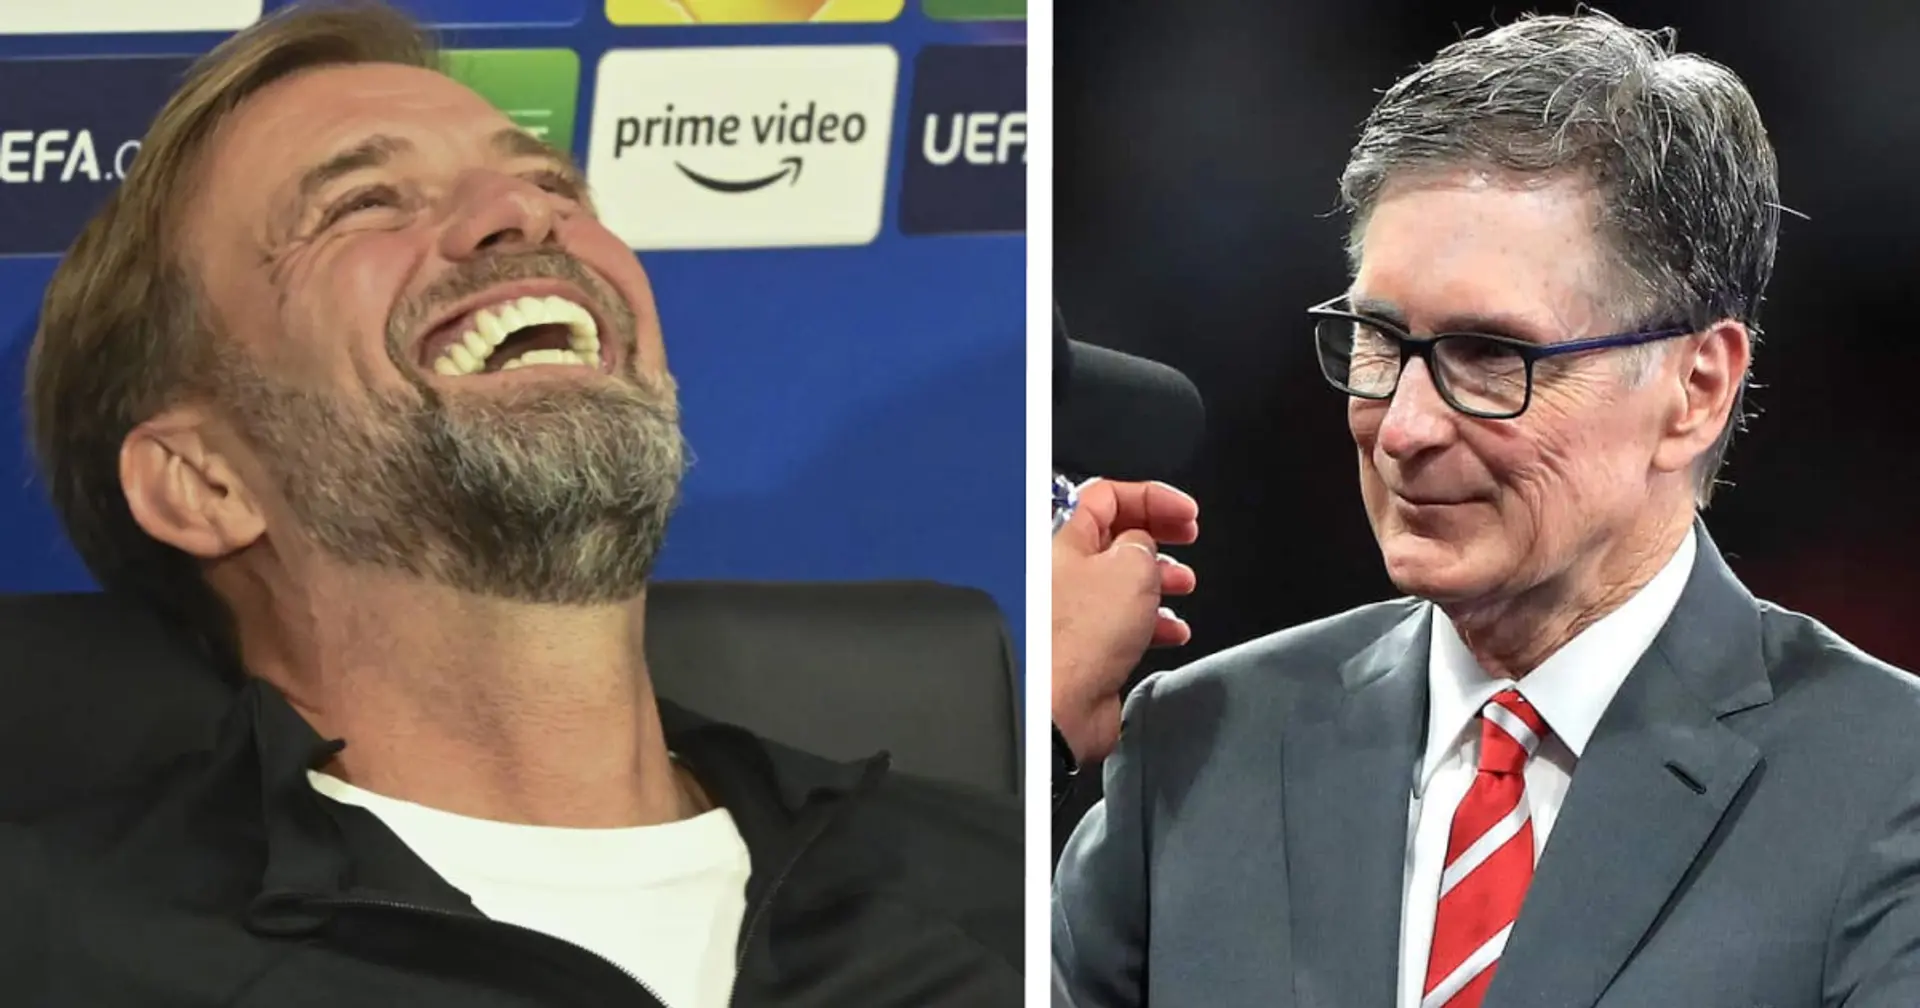 Liverpool fan names one thing Jurgen Klopp must stop doing – it has to do with FSG